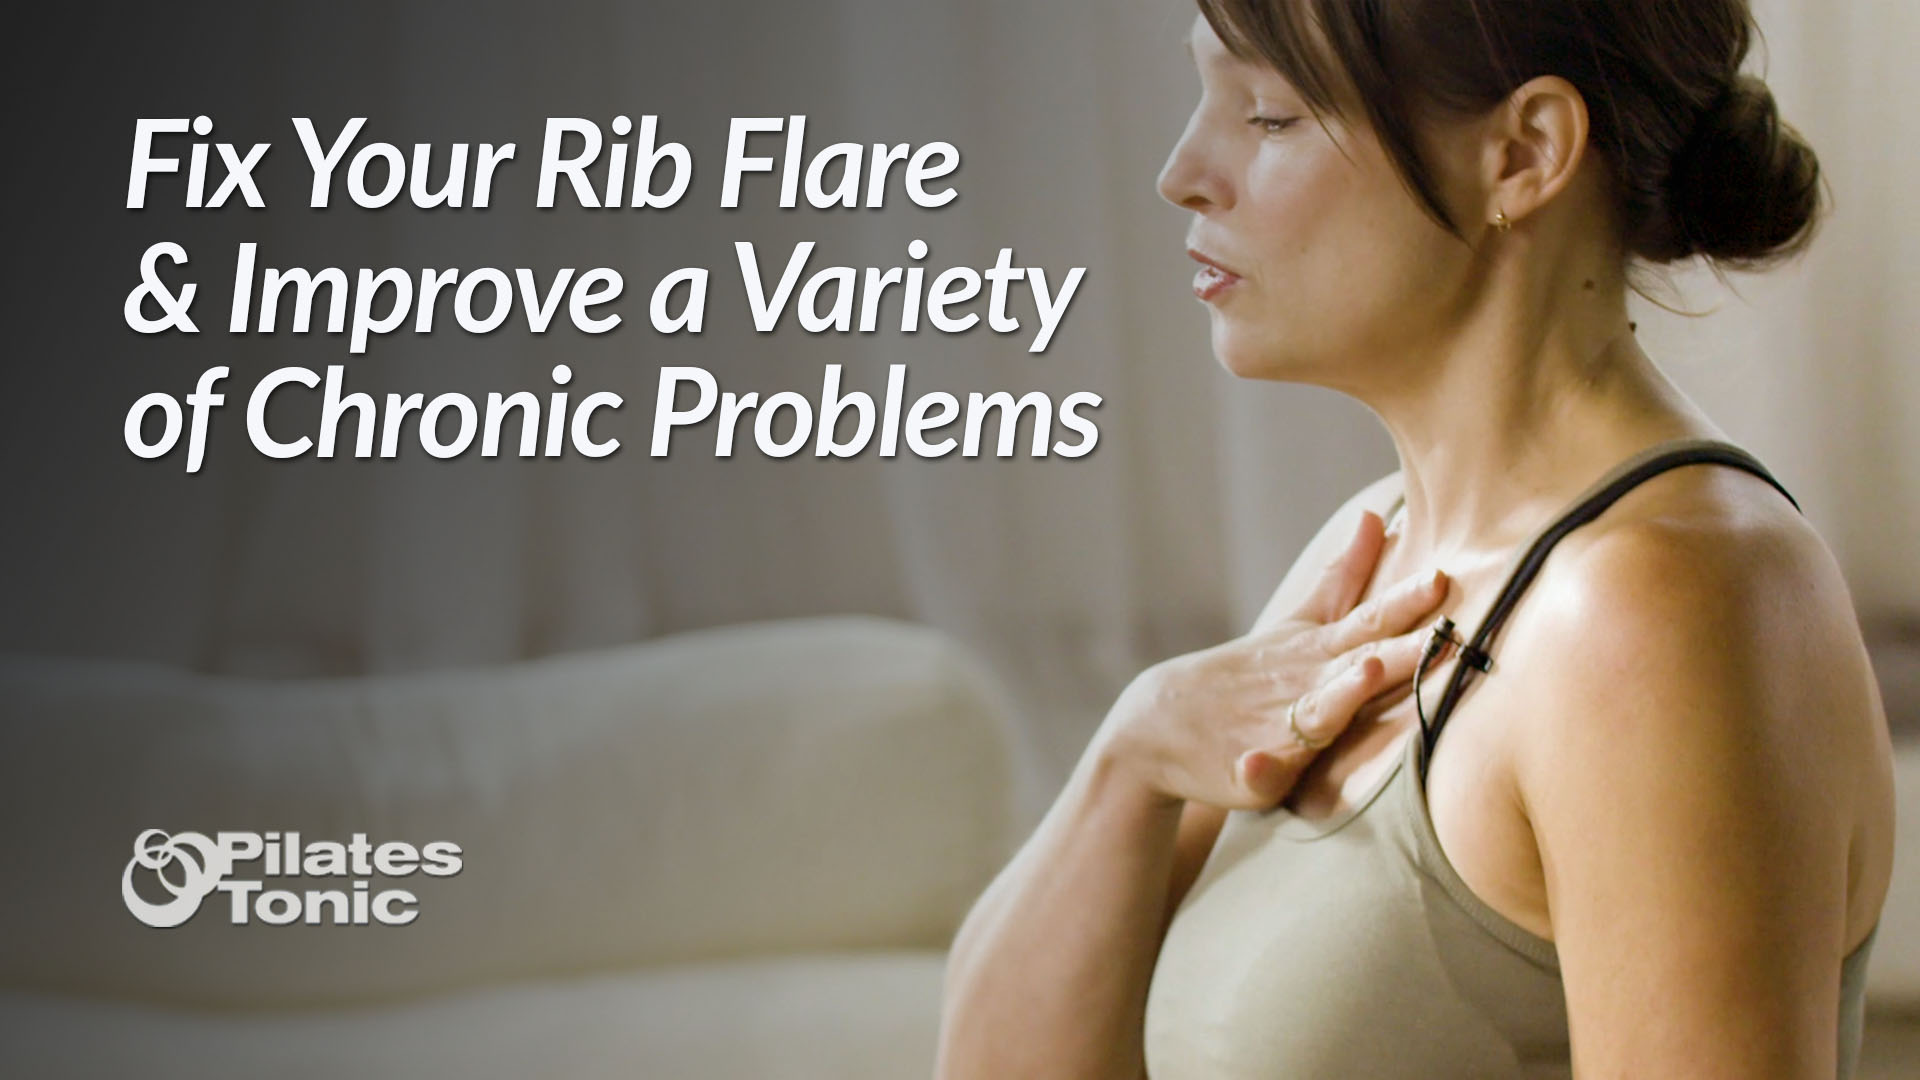 https://www.pilatestonic.com/wp-content/uploads/2022/11/Fix-Your-Rib-Flare-and-Improve-a-Variety-of-Chronic-Problems.jpg